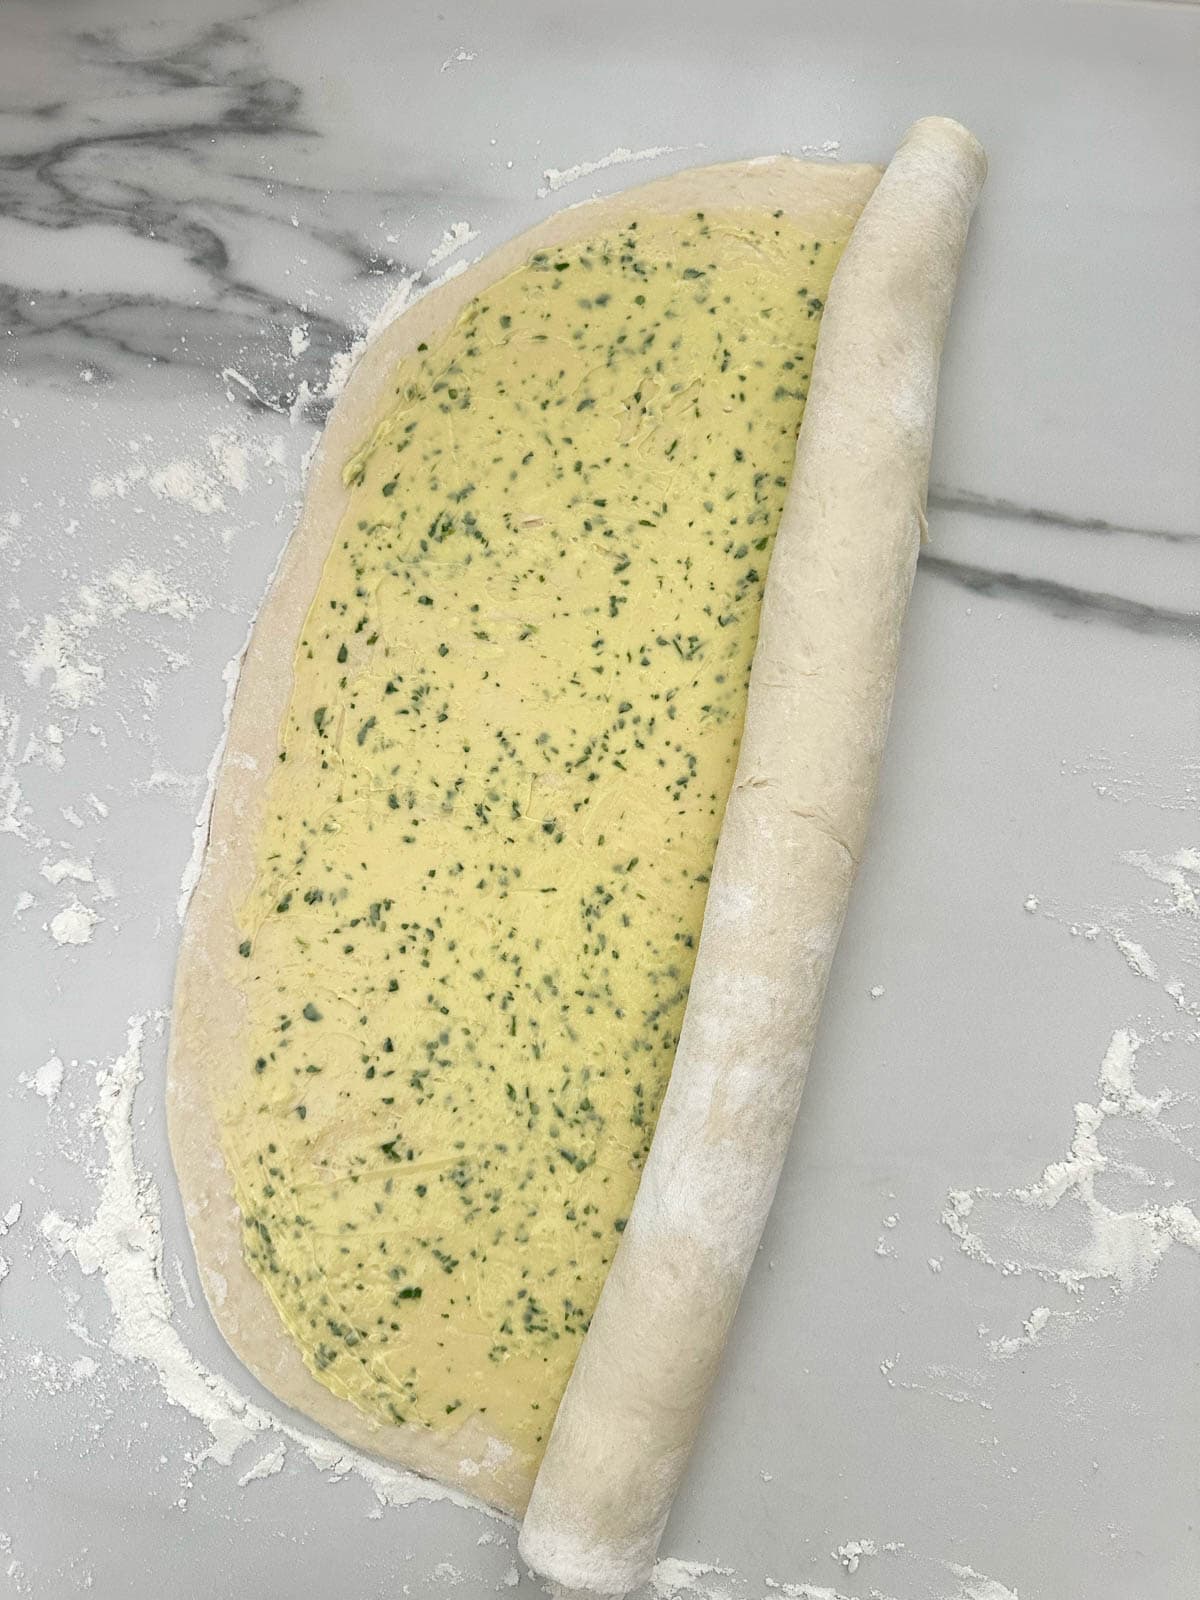 Rolling the garlic bread dough into a large scroll shape.